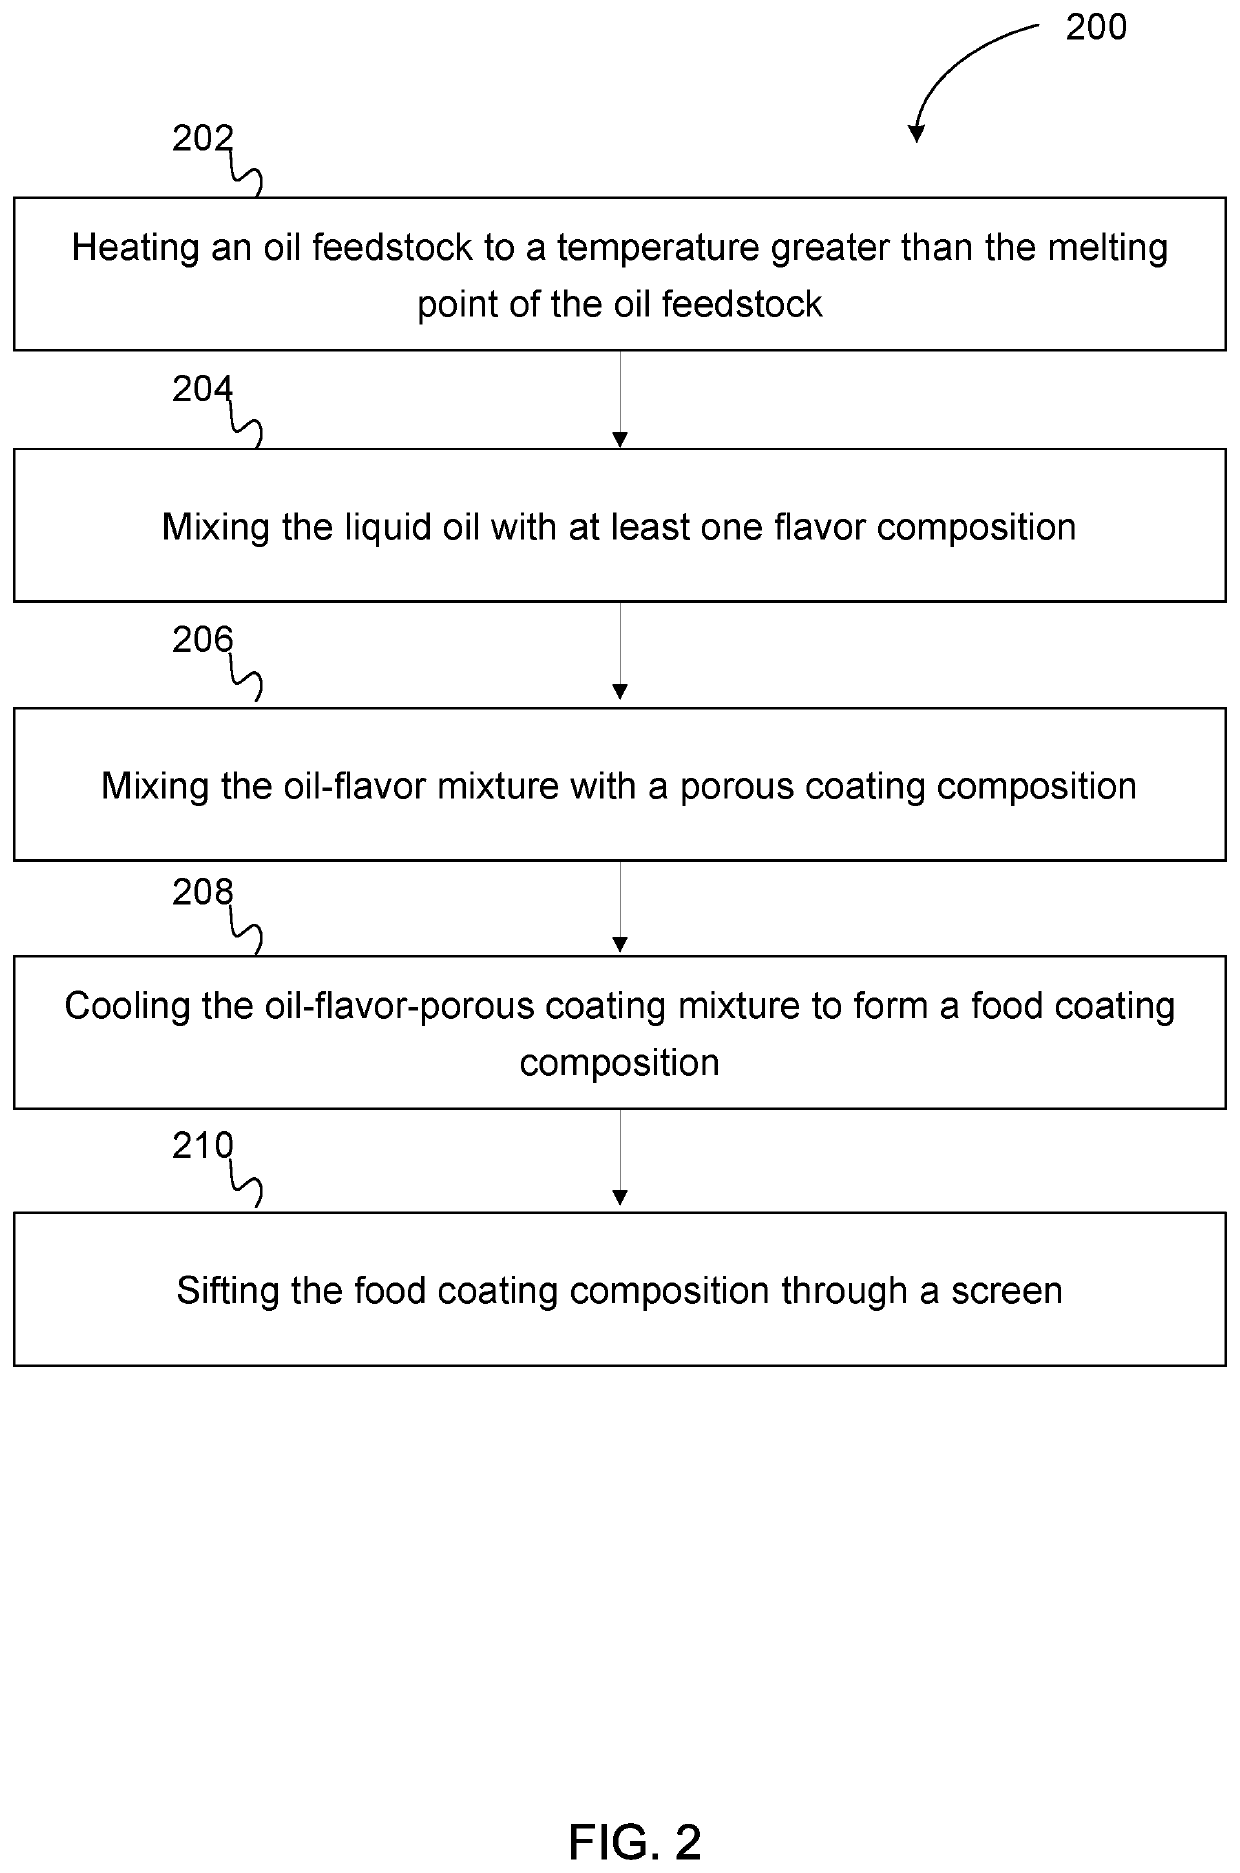 Food coating compositions and methods of making food coating compositions